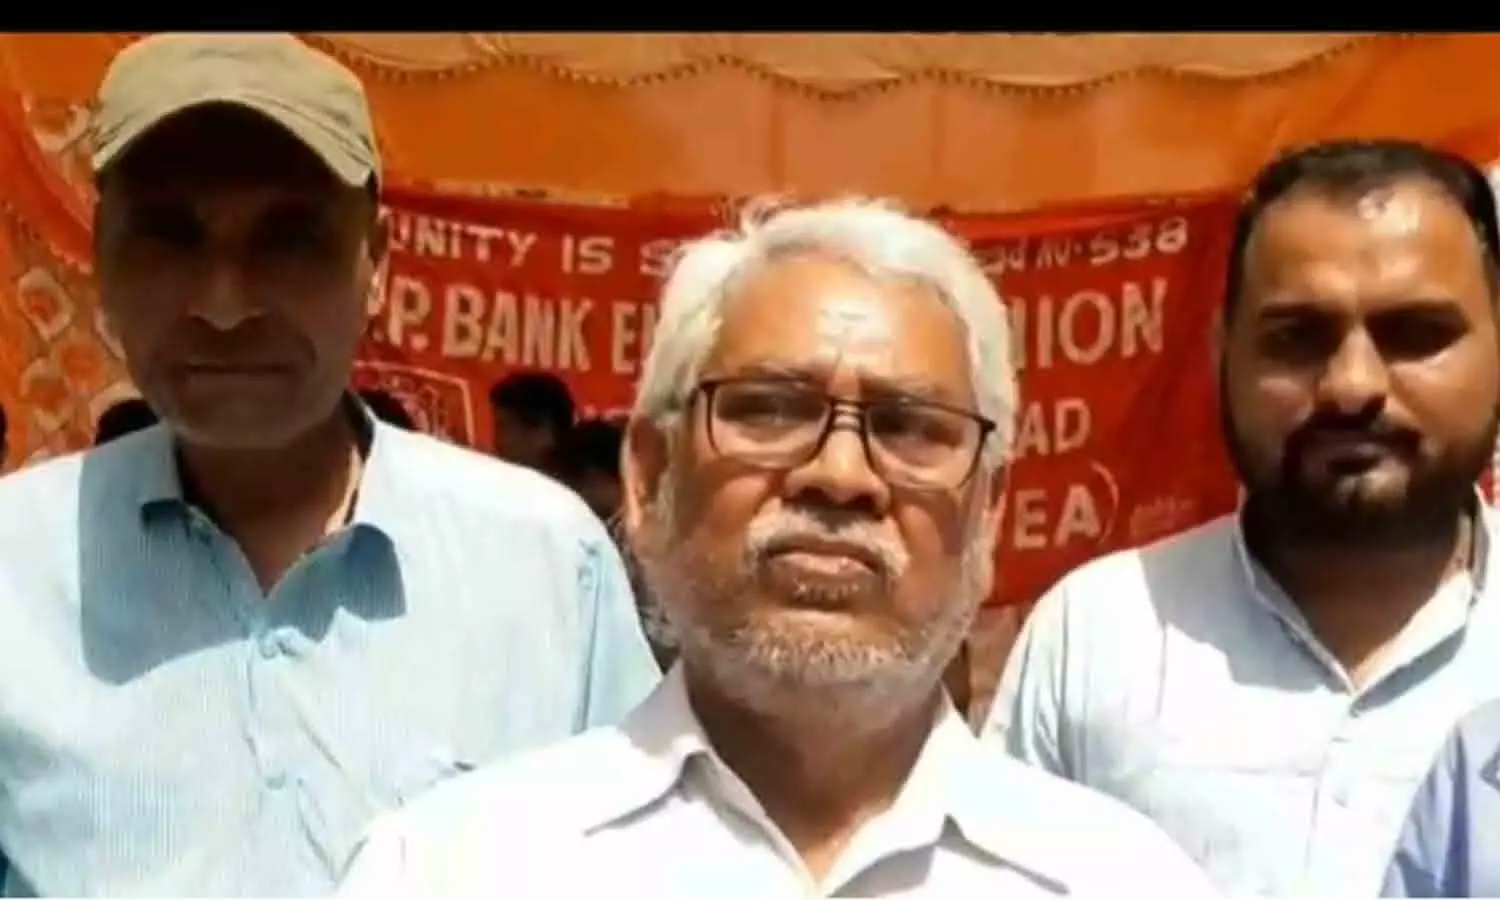 Bank workers strike: Bank employees said - privatization of banks should stop, old pension scheme should be restored